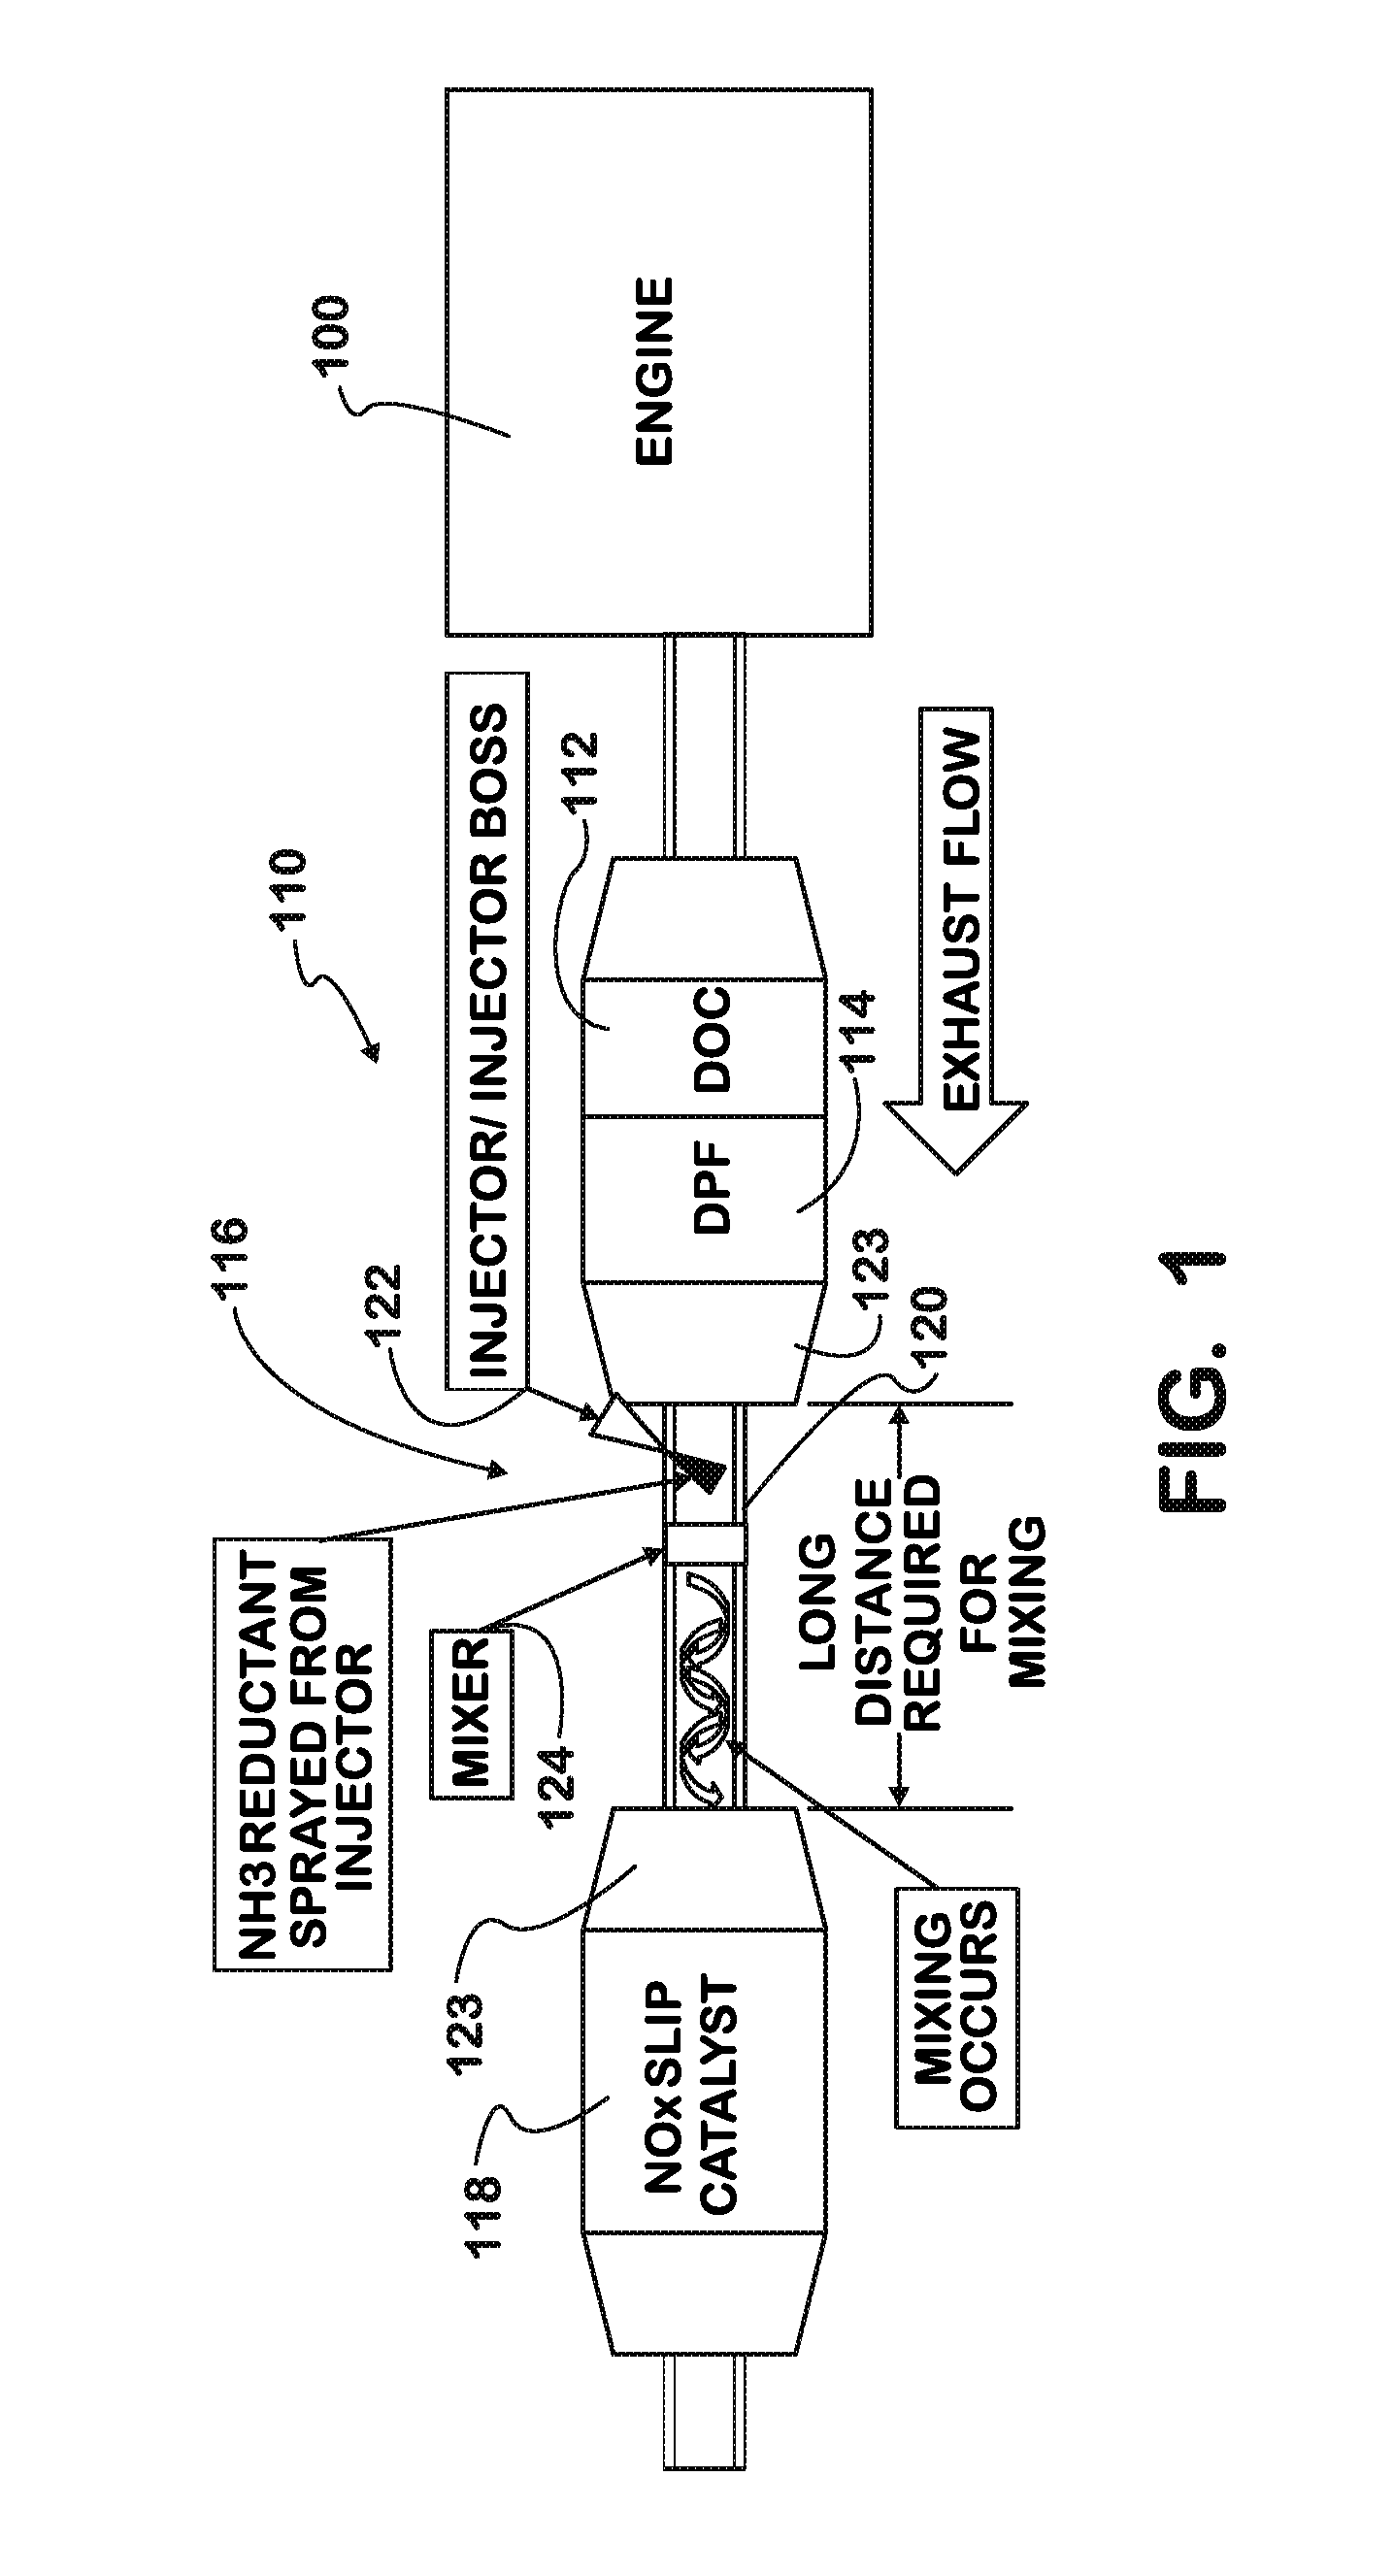 Method and apparatus for gaseous mixing in a diesel exhaust system